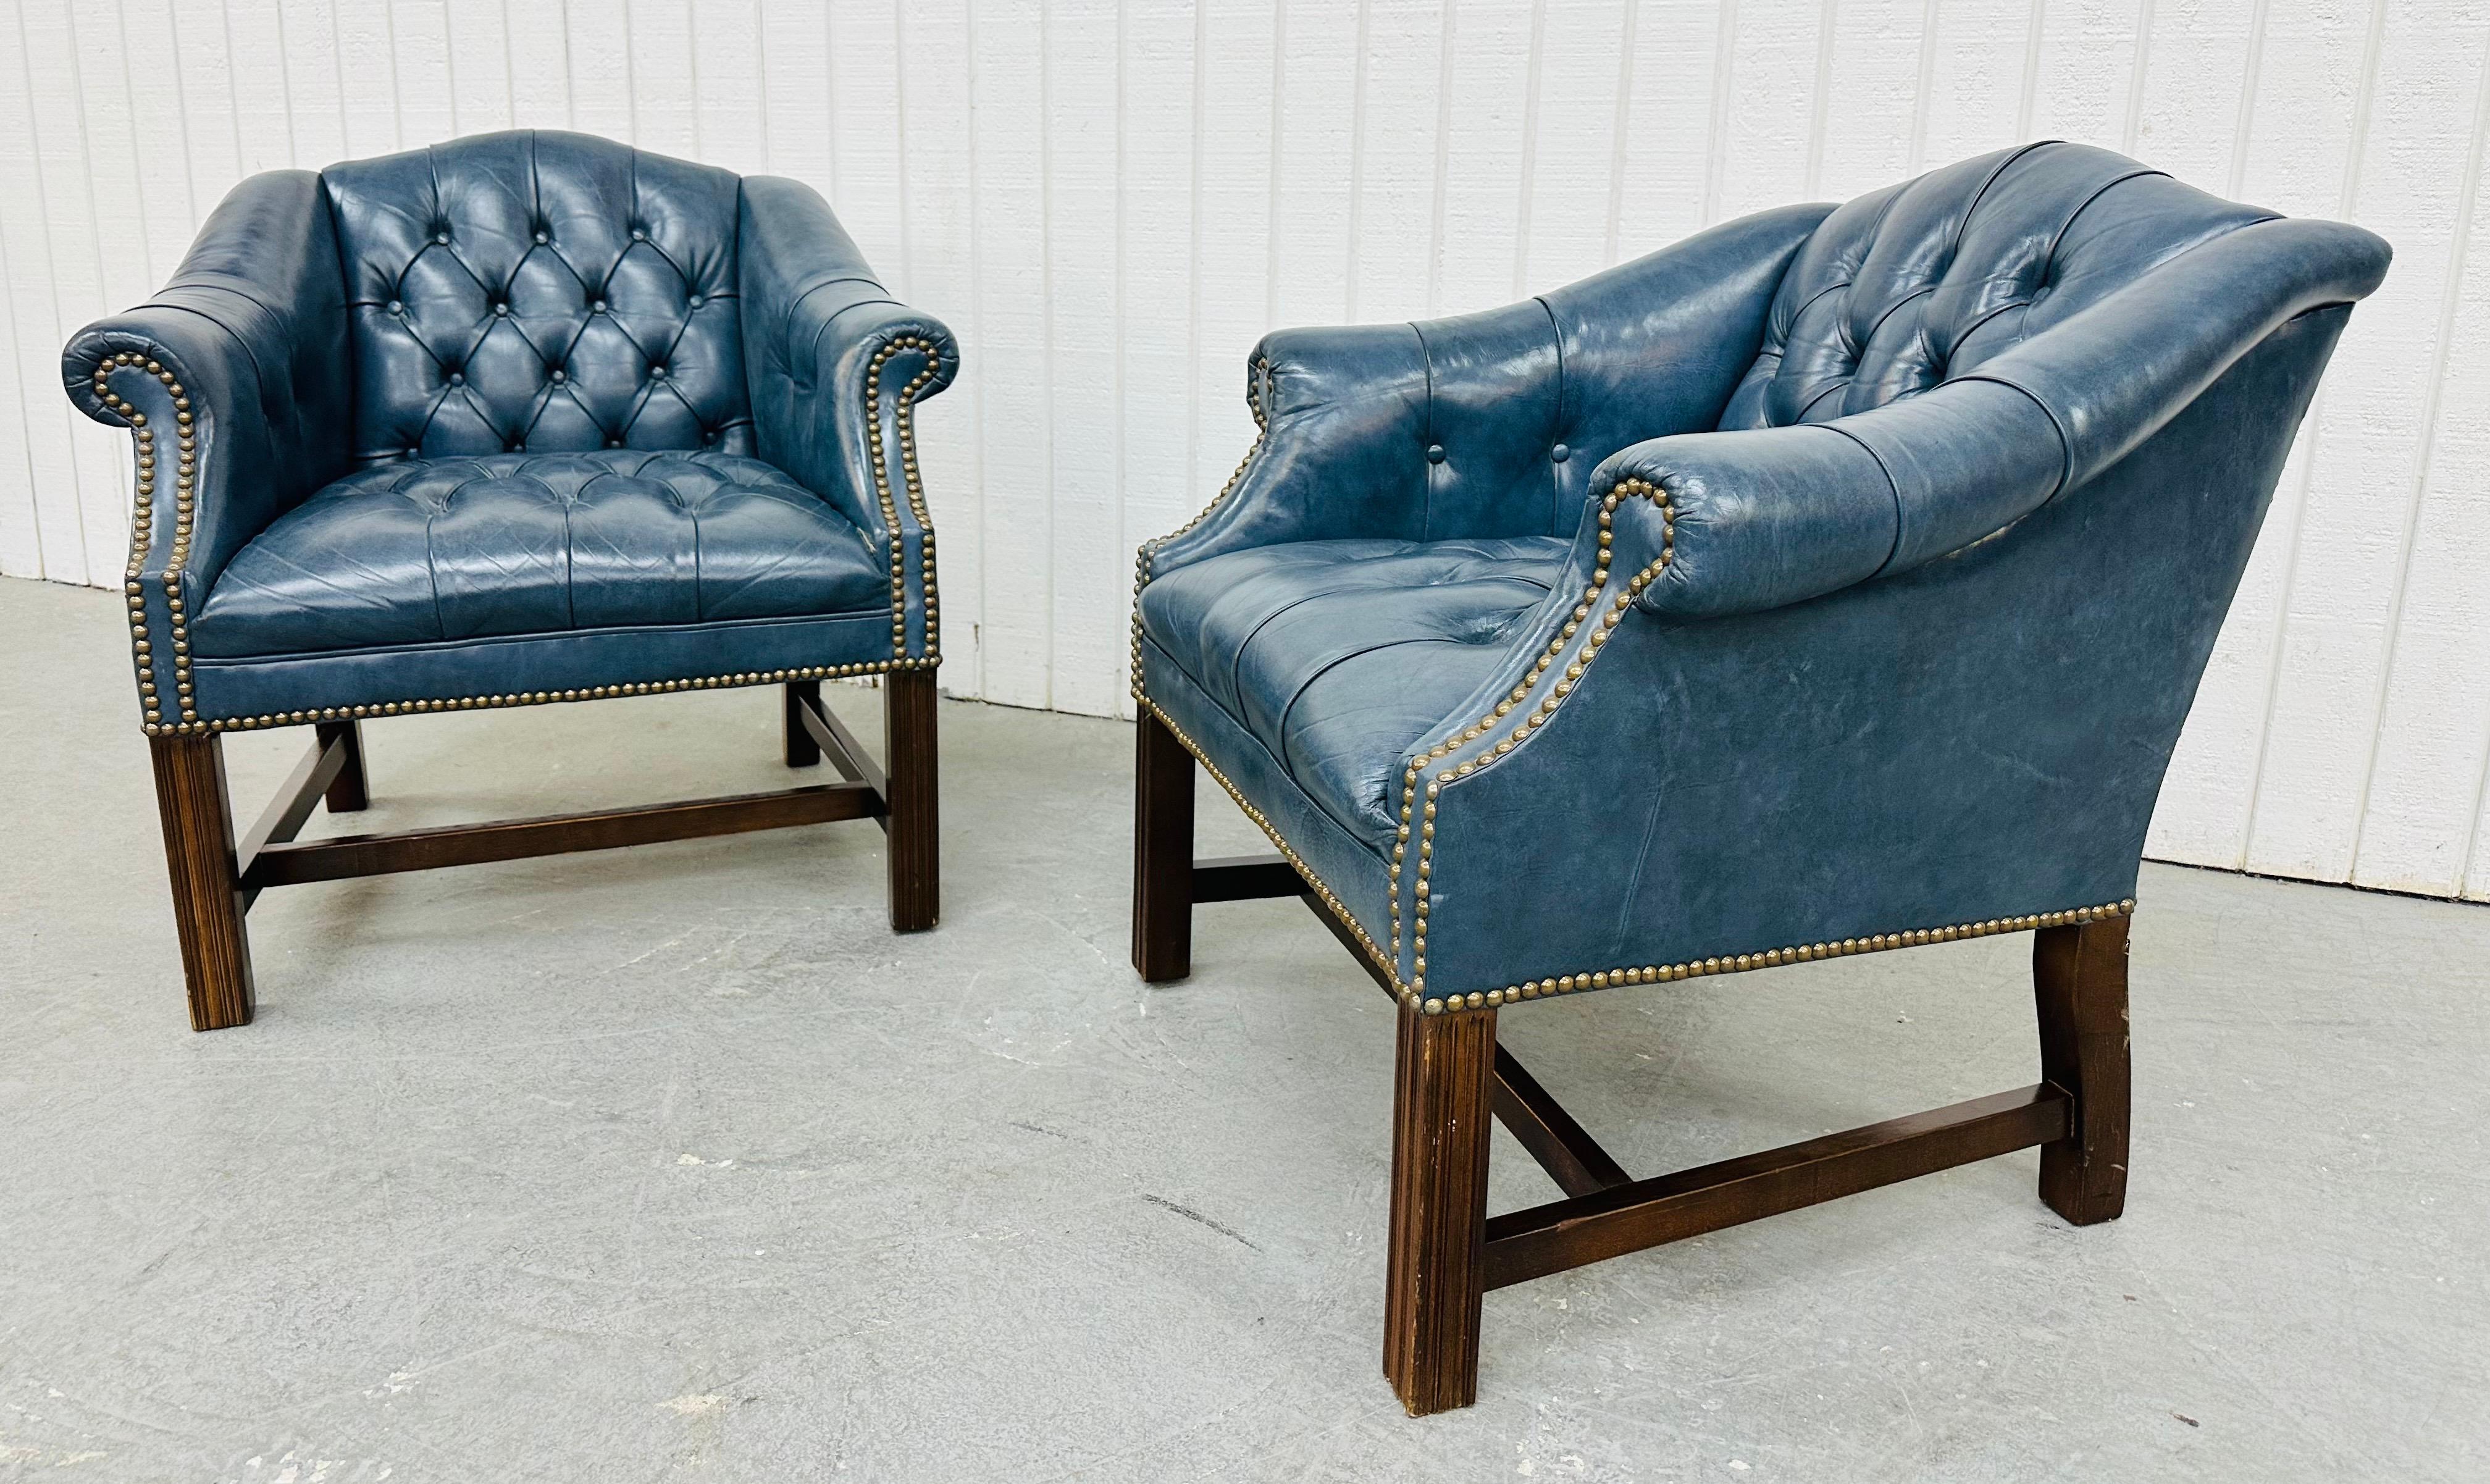 Chippendale Vintage Blue Chesterfield Arm Chairs - Set of 2